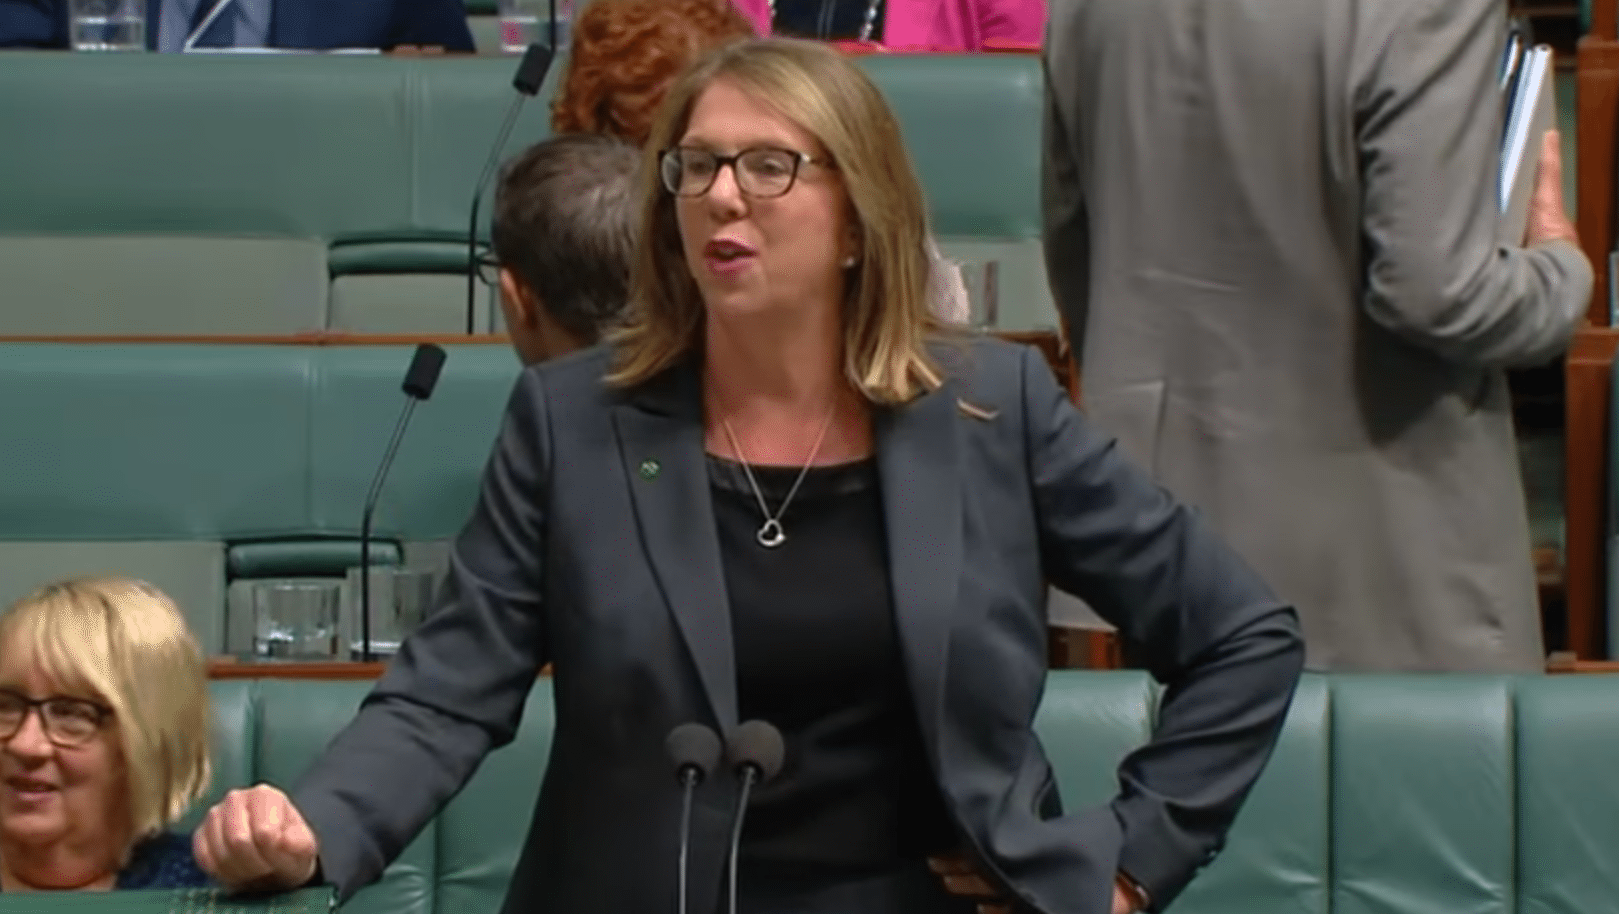 Shadow health minister calls out the Liberal party over gay ‘conversion’ therapy